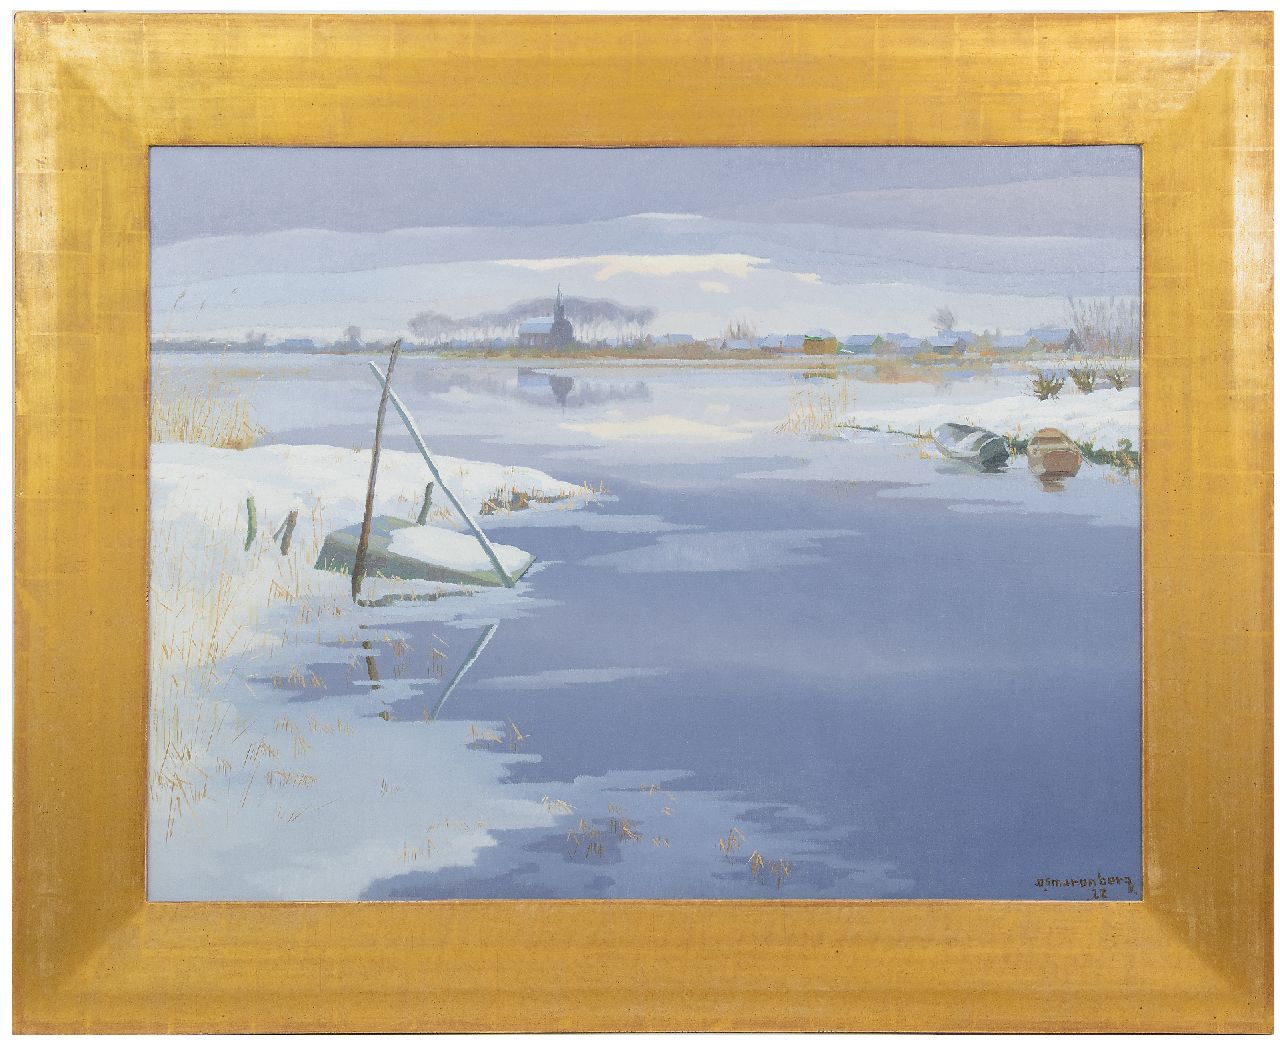 Smorenberg D.  | Dirk Smorenberg, View of the Vuntusplas in winter, oil on canvas 73.0 x 95.2 cm, signed l.r. and dated '22